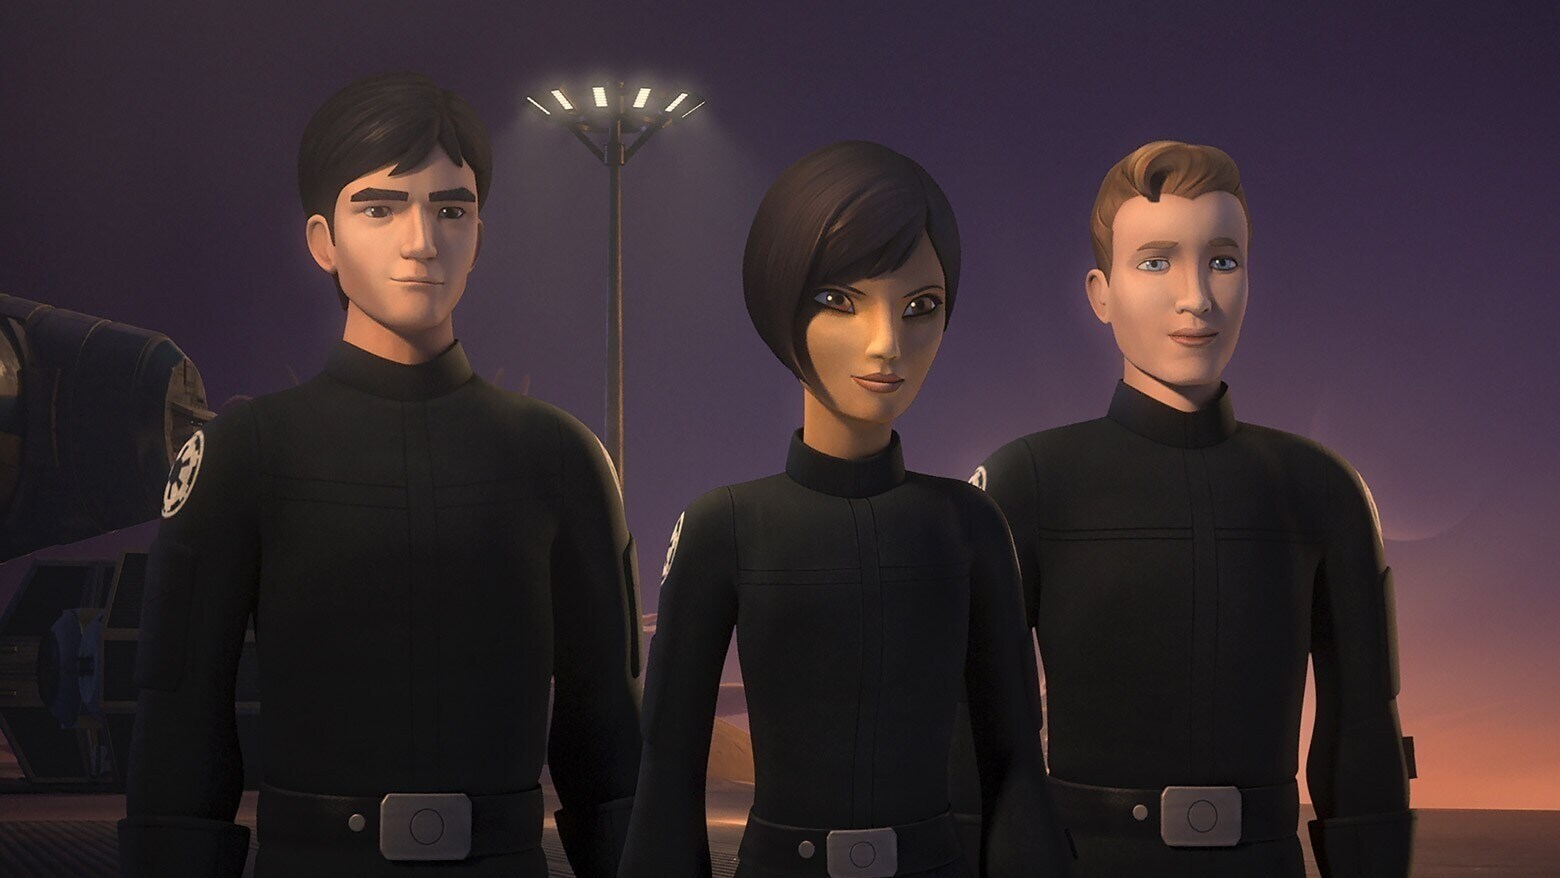 Sabine, undercover as an Imperial cadet, stands with two other cadets